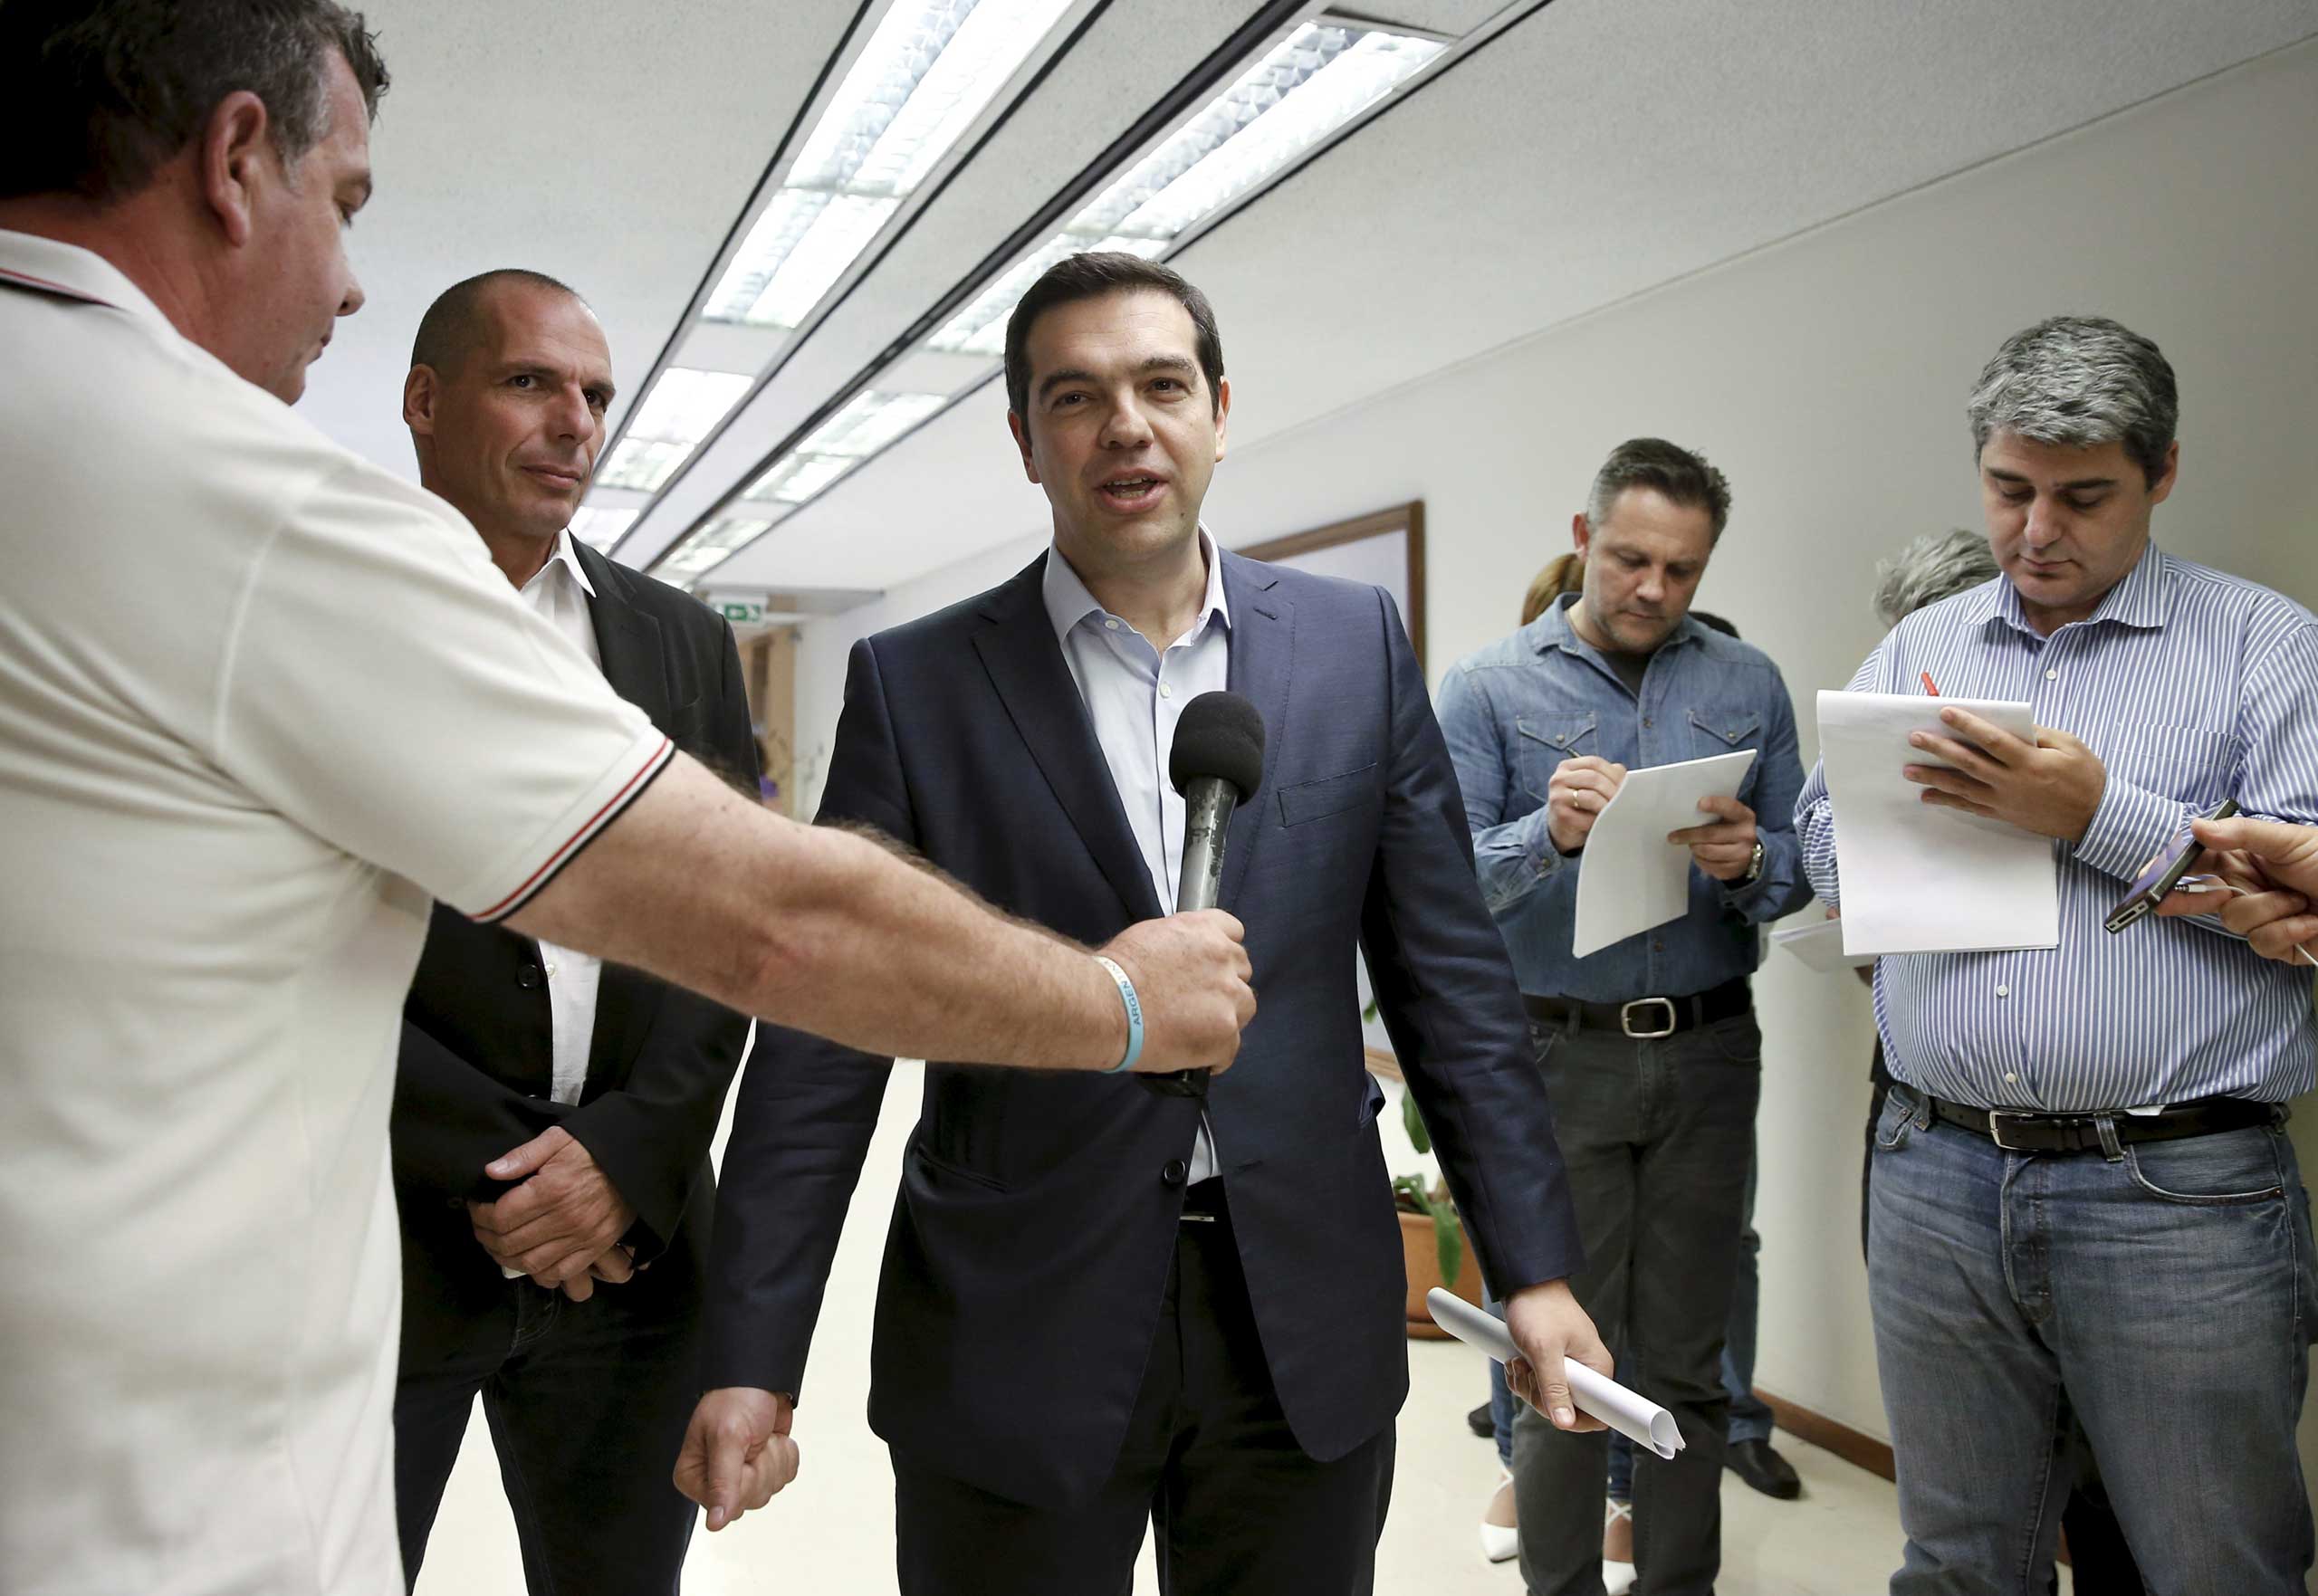 Greek Prime Minister Alexis Tsipras (C) makes statements to the media as Finance Minister Yanis Varoufakis (2nd L) looks on after a meeting at the ministry in Athens May 27, 2015. (Alkis Konstantinidis—Reuter)